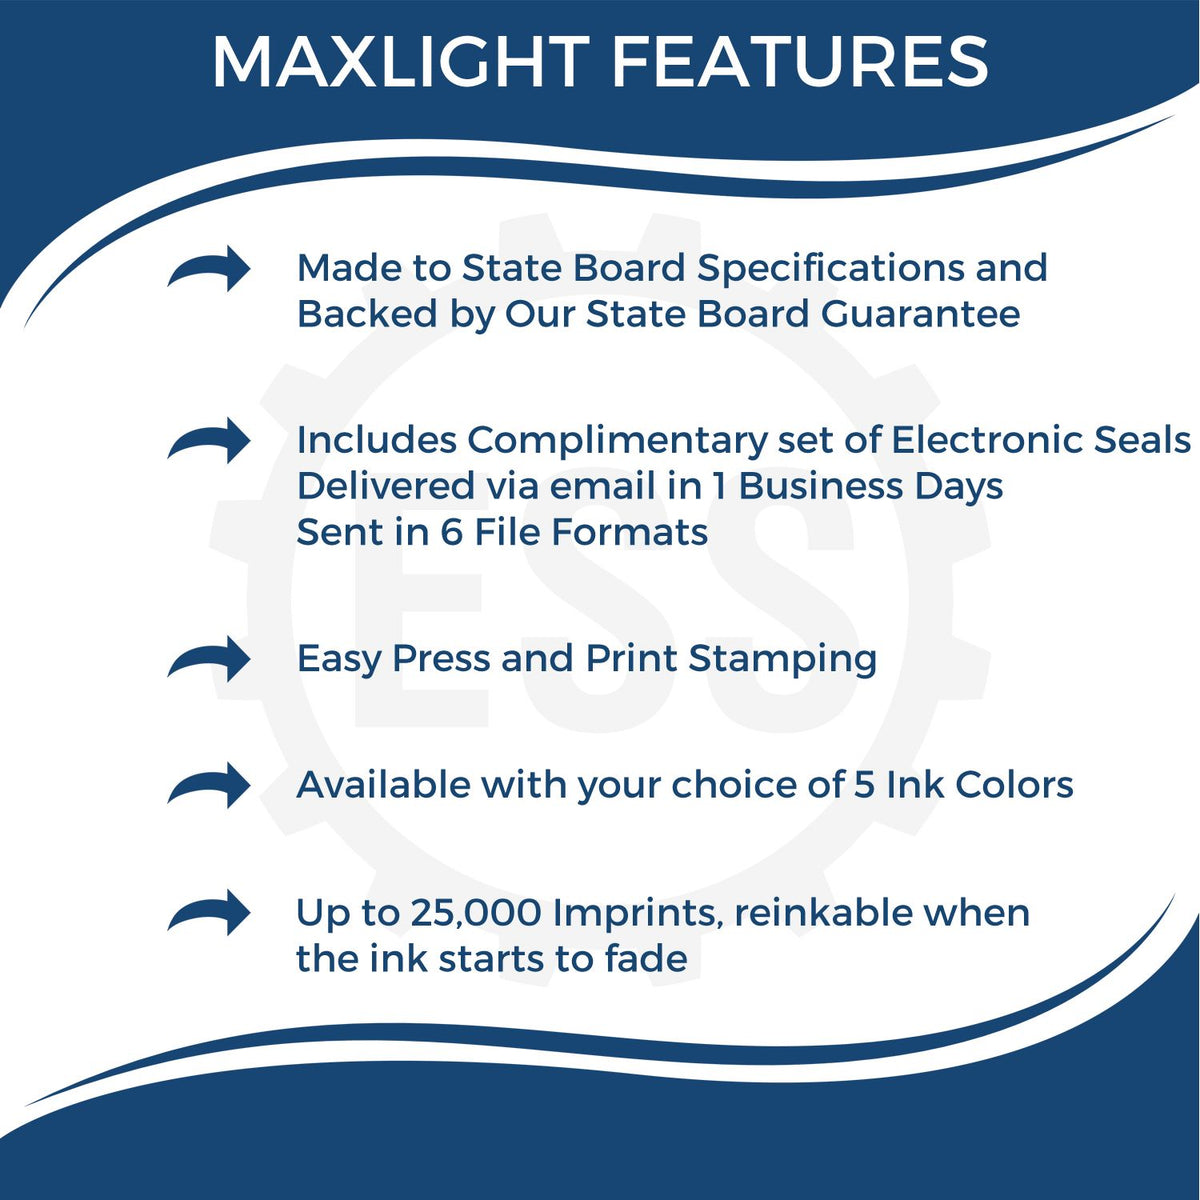 A picture of an infographic highlighting the selling points for the Premium MaxLight Pre-Inked Colorado Geology Stamp